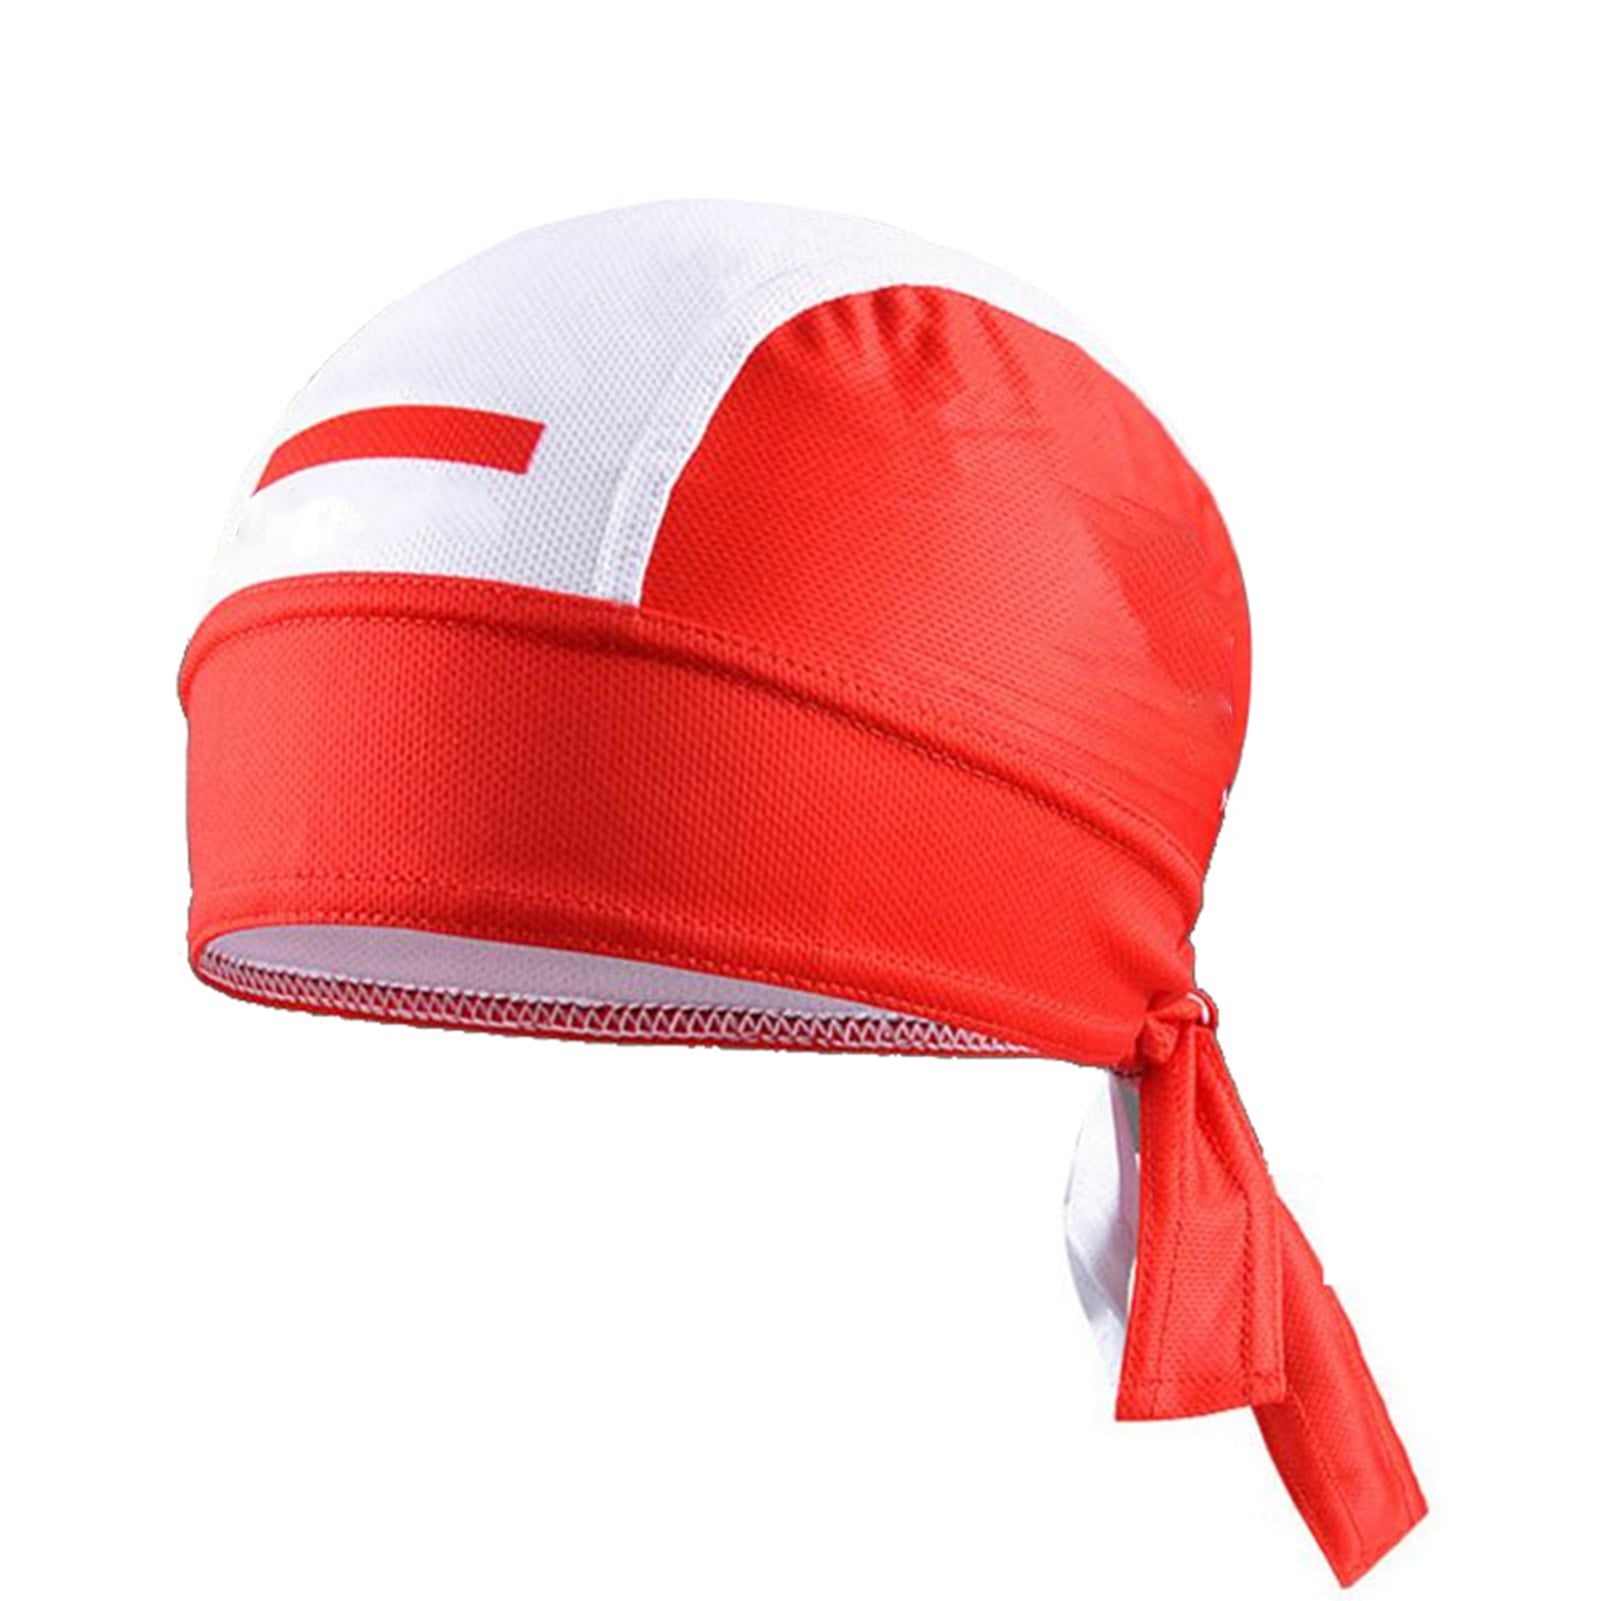 Outdoor Sports Cycling Pirate Hat Cap Breathable Sunscreen Headband One Size